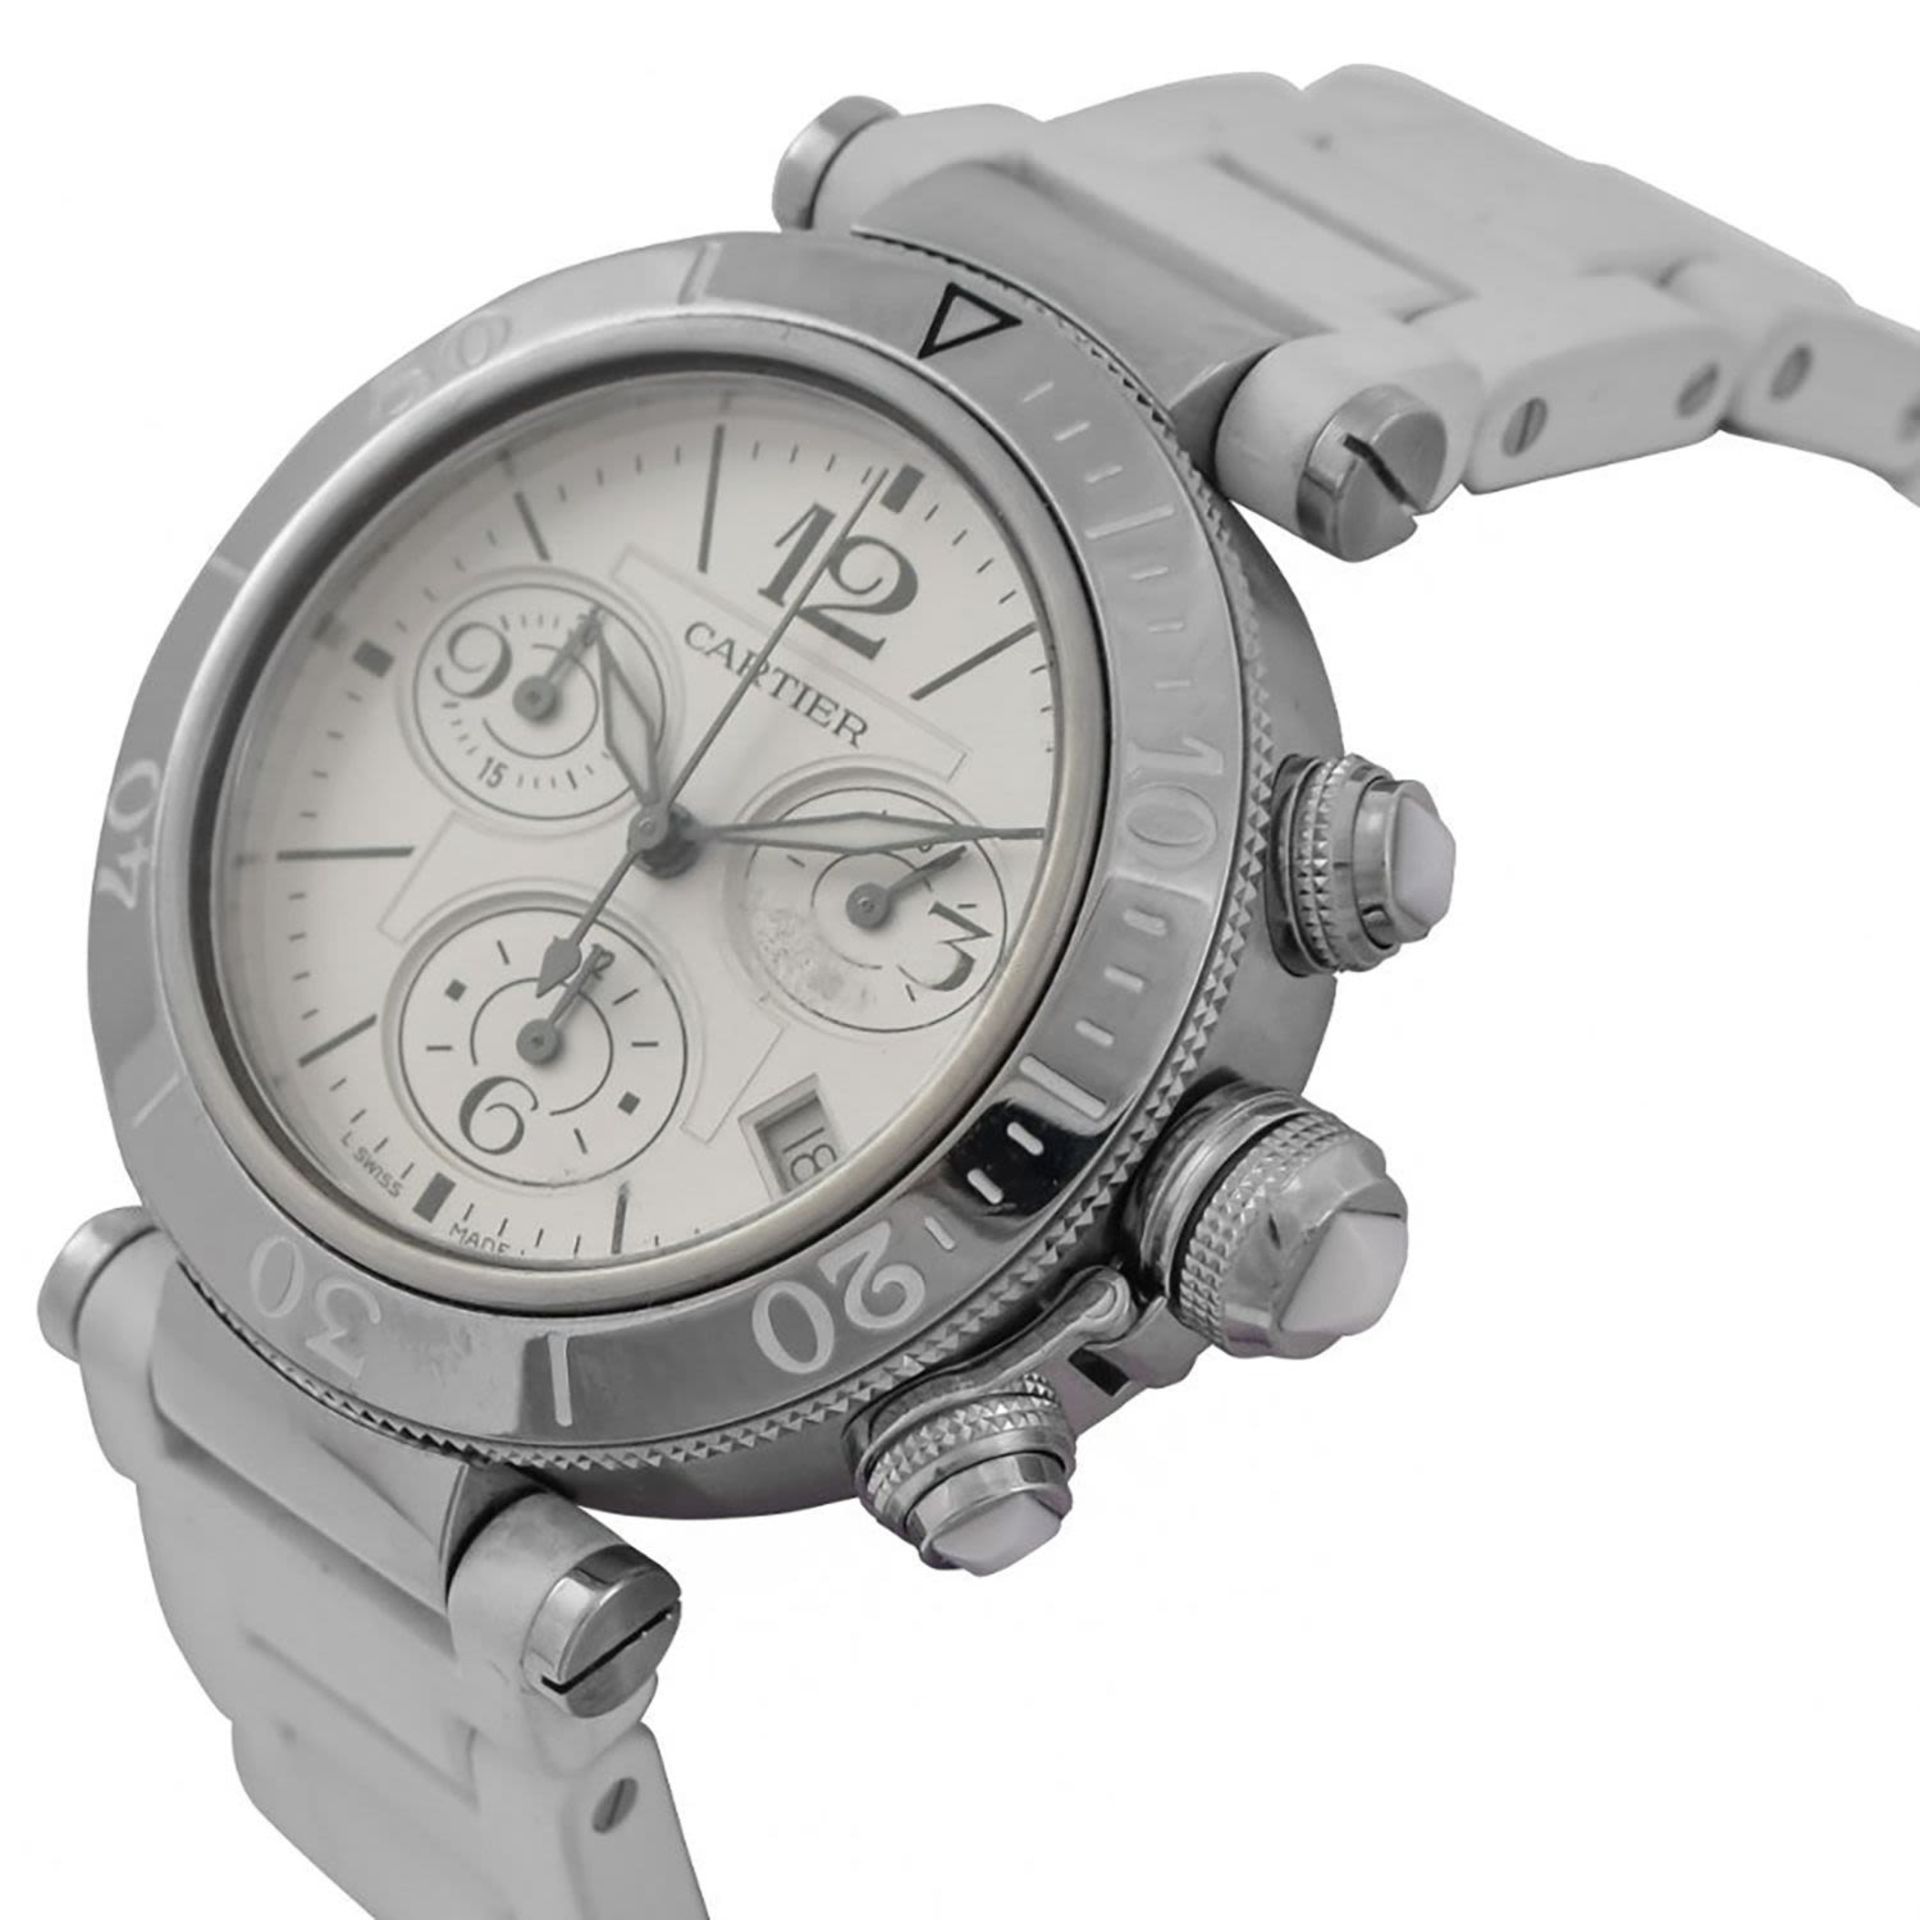 Cartier Pasha Chronograph 42mm Unisex wristwatch, in steel, year 2010 - Image 2 of 5